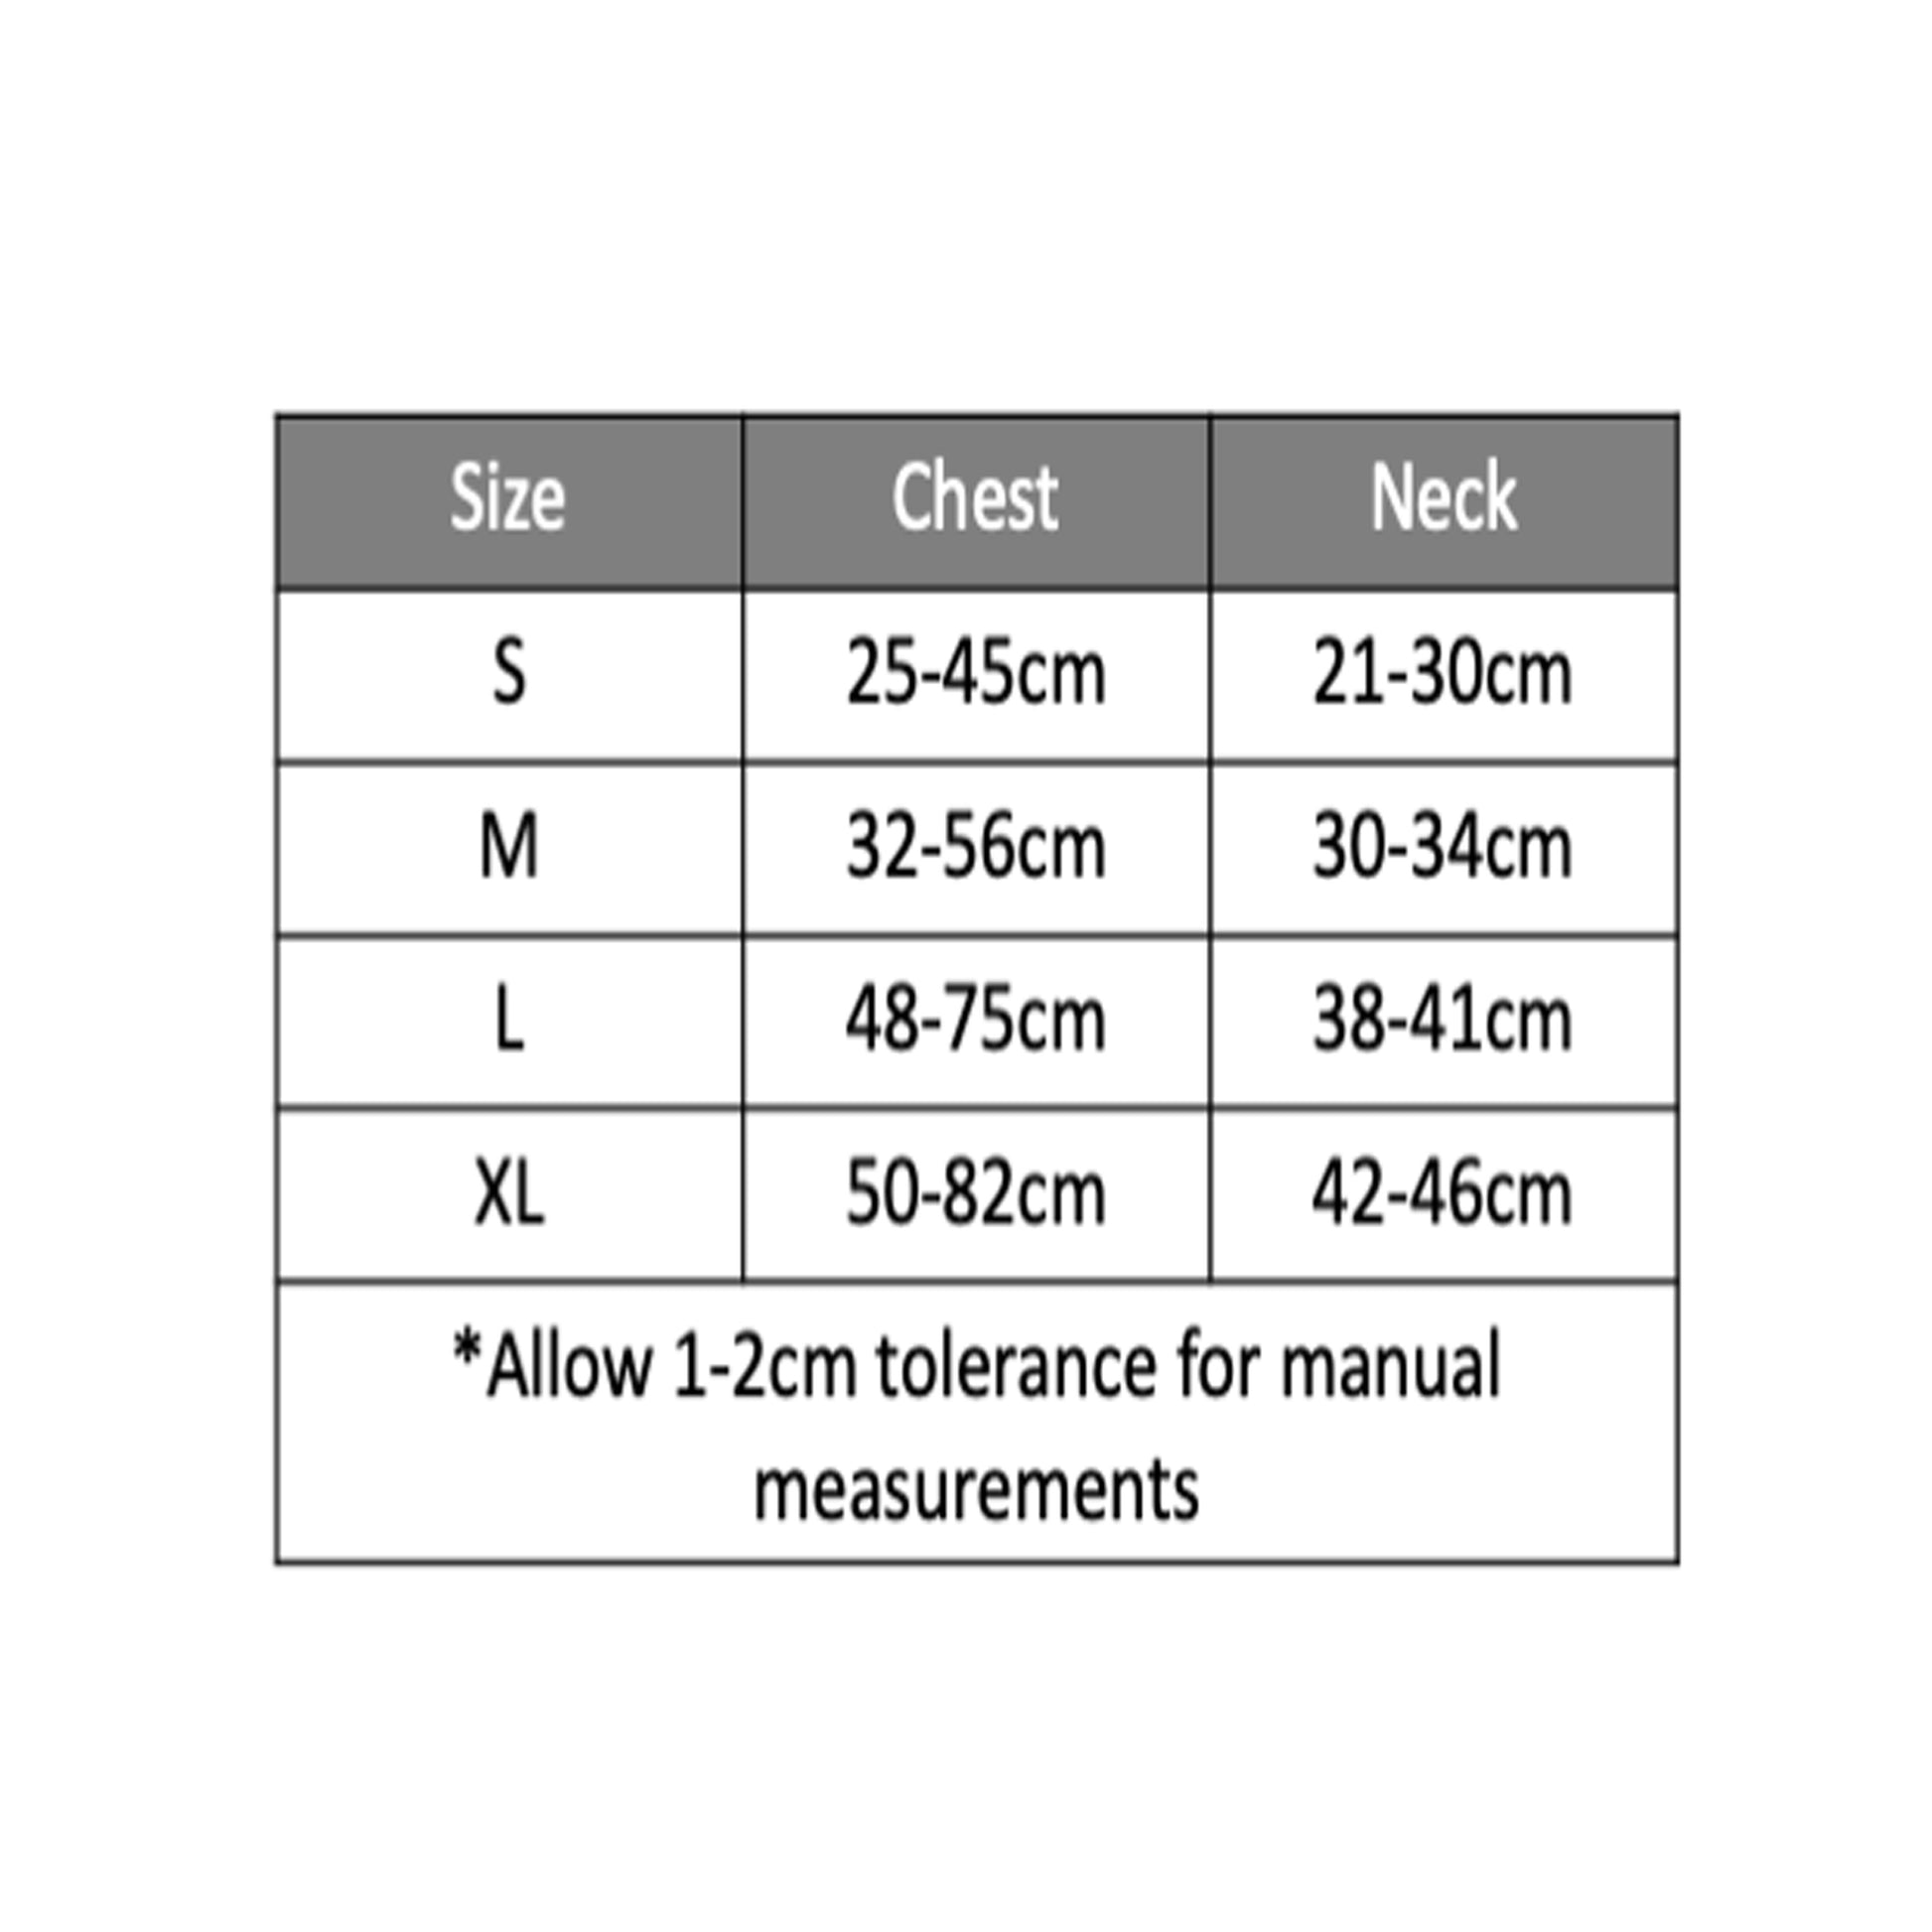 A size chart polyester harness and lead